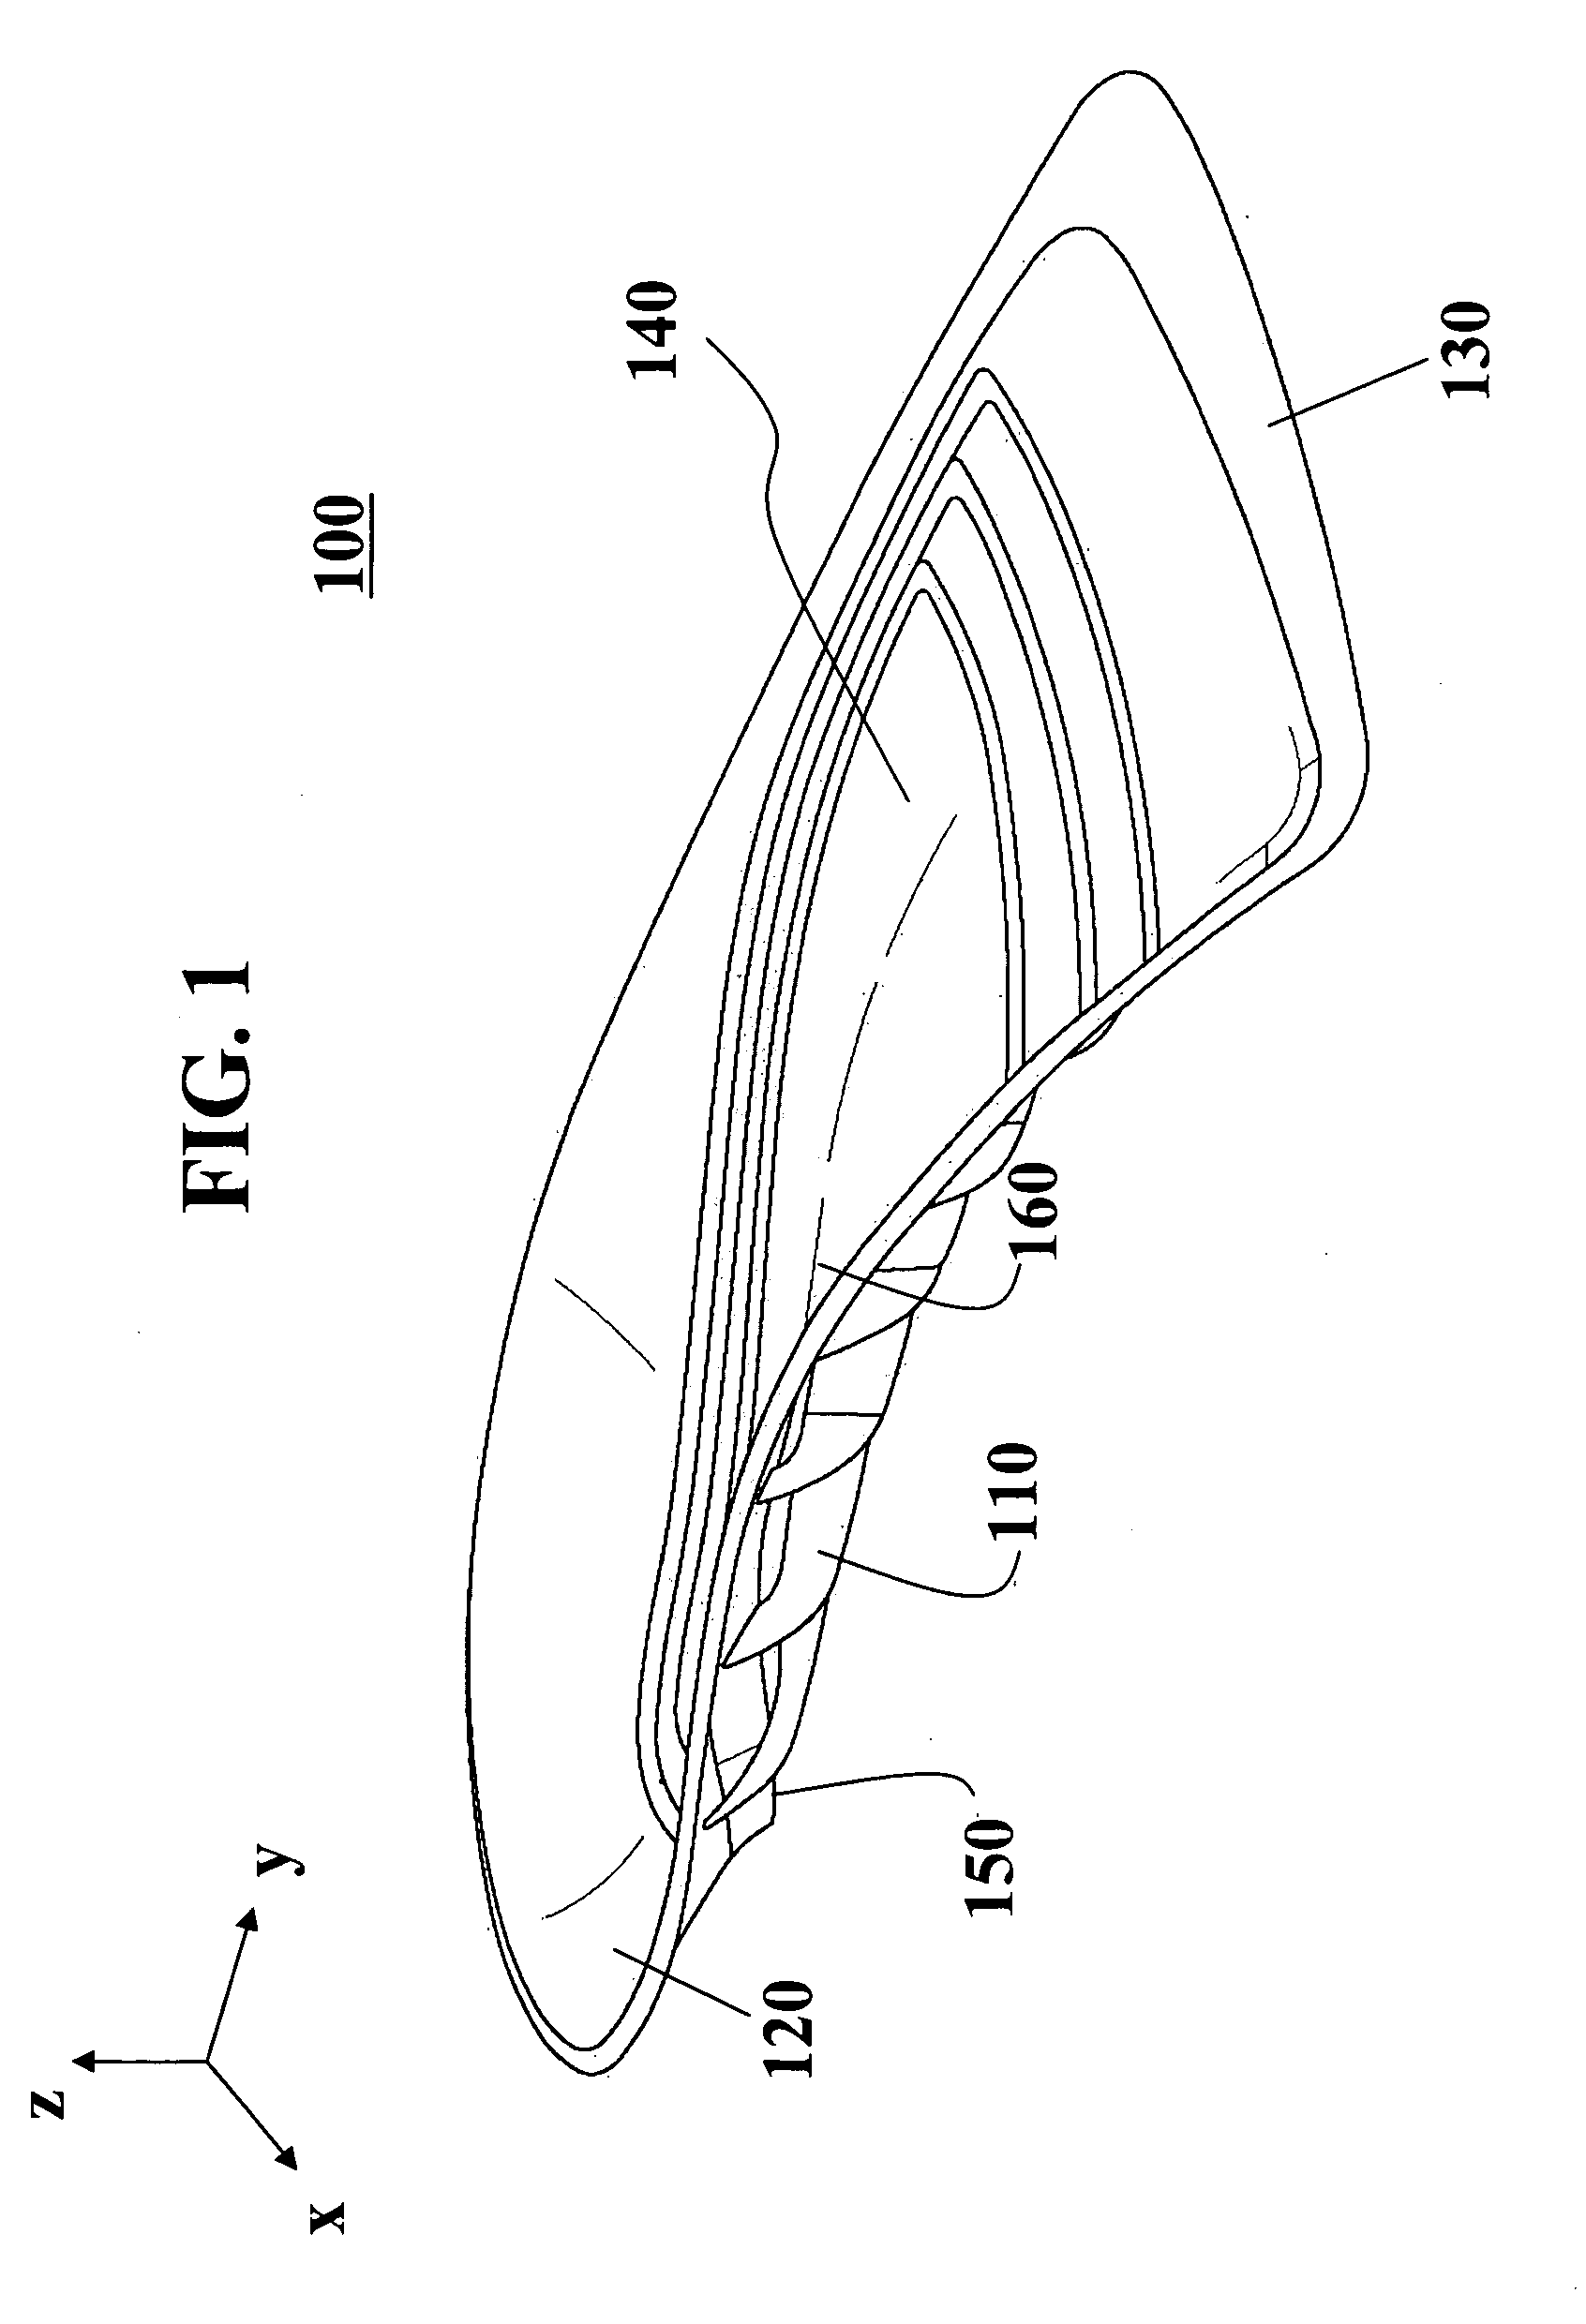 Arch support with a patterned surface